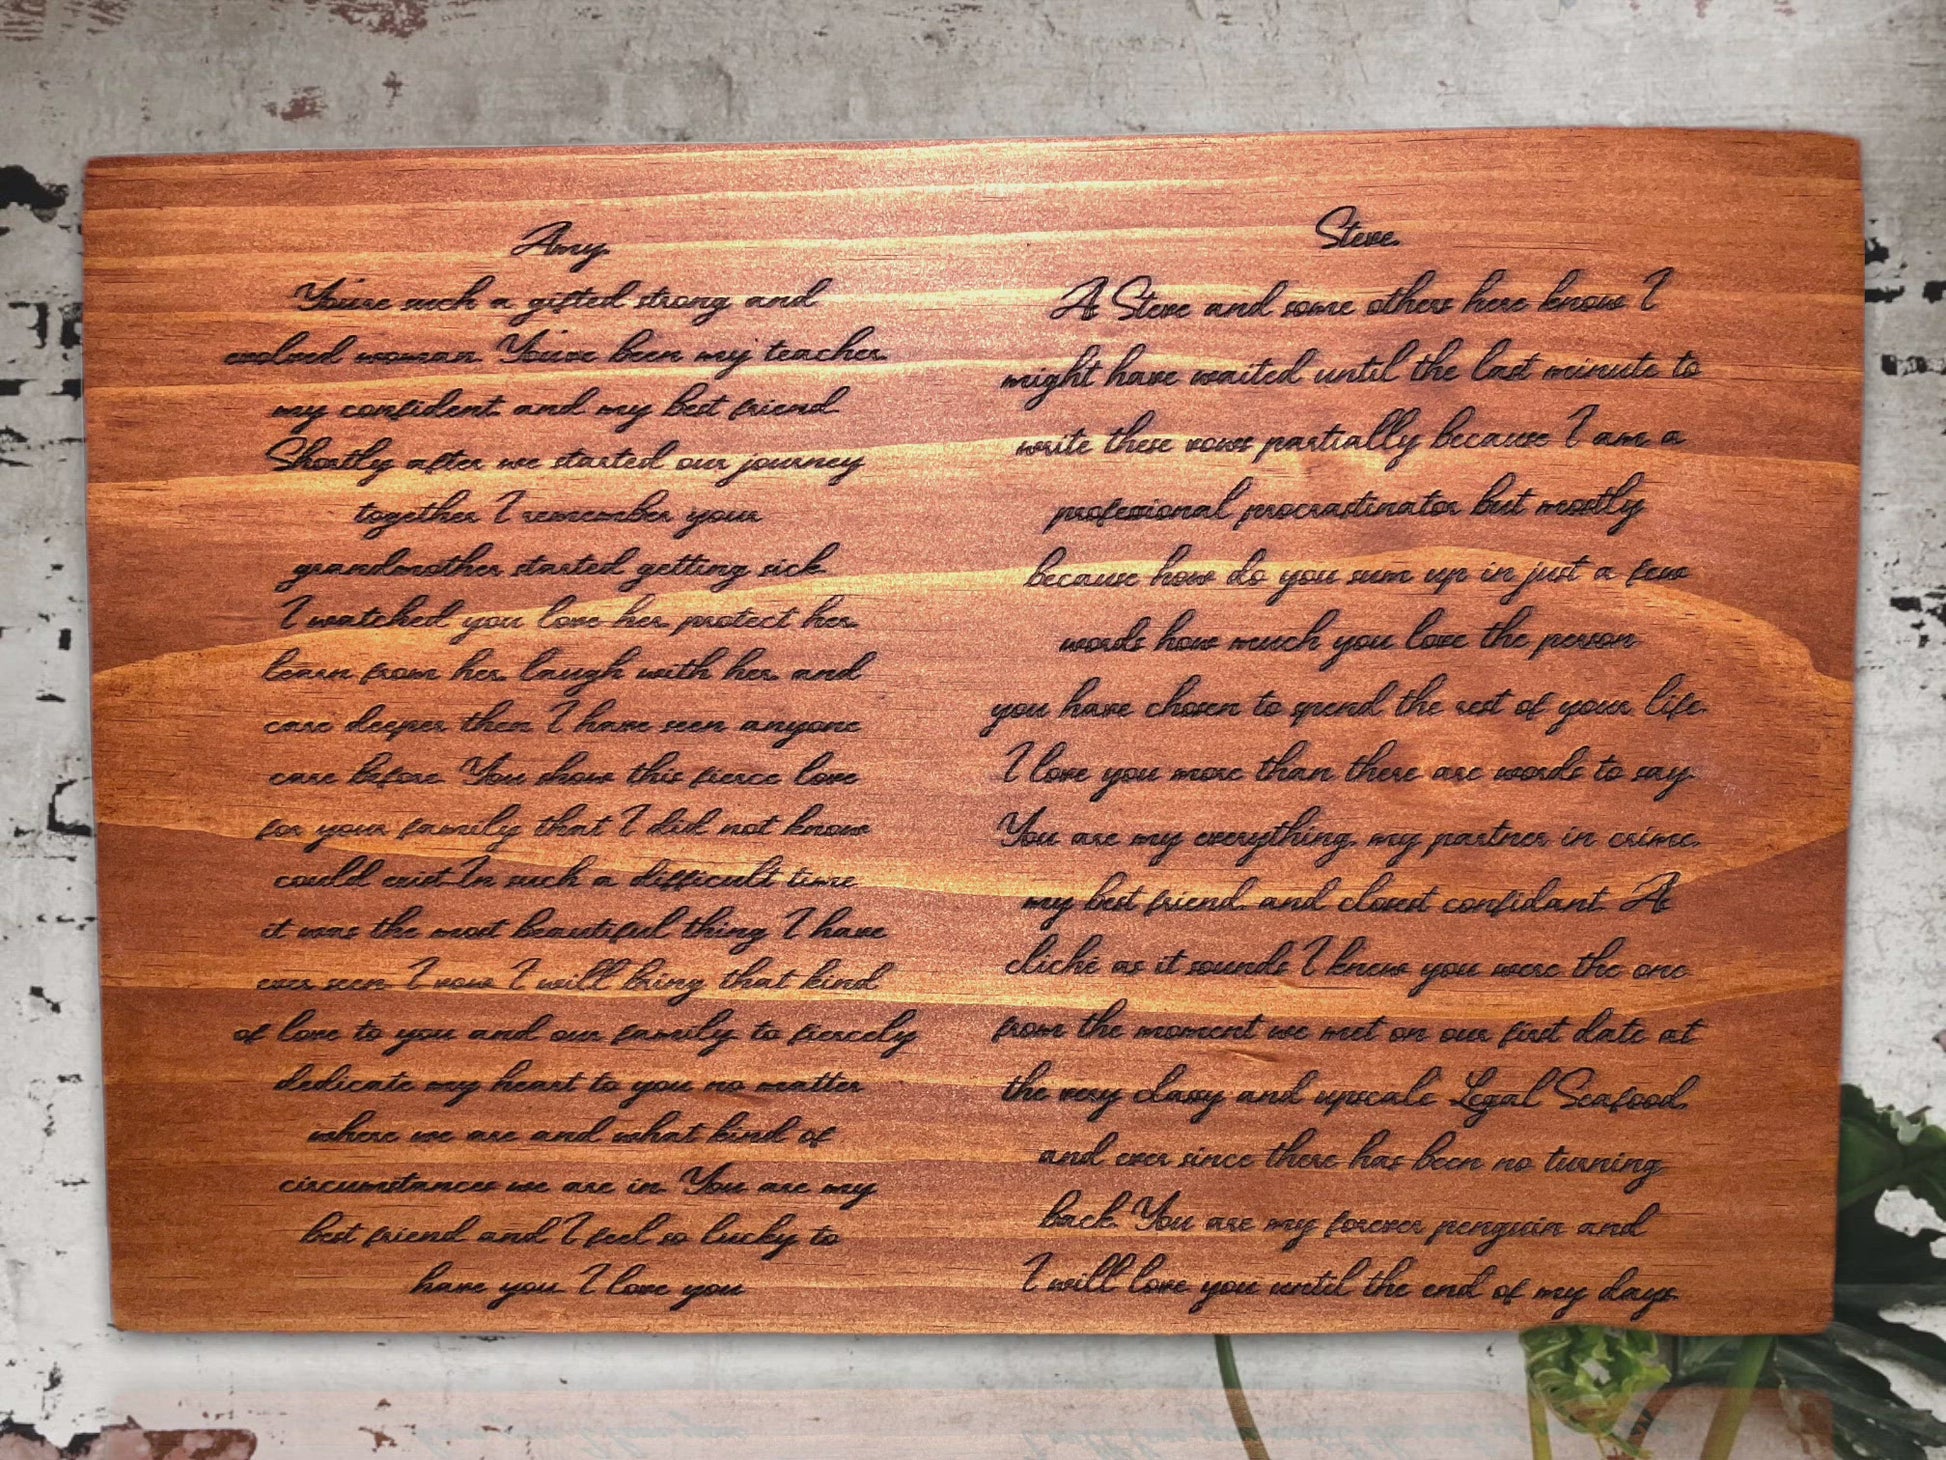 Express your style with custom engraved wooden signage.